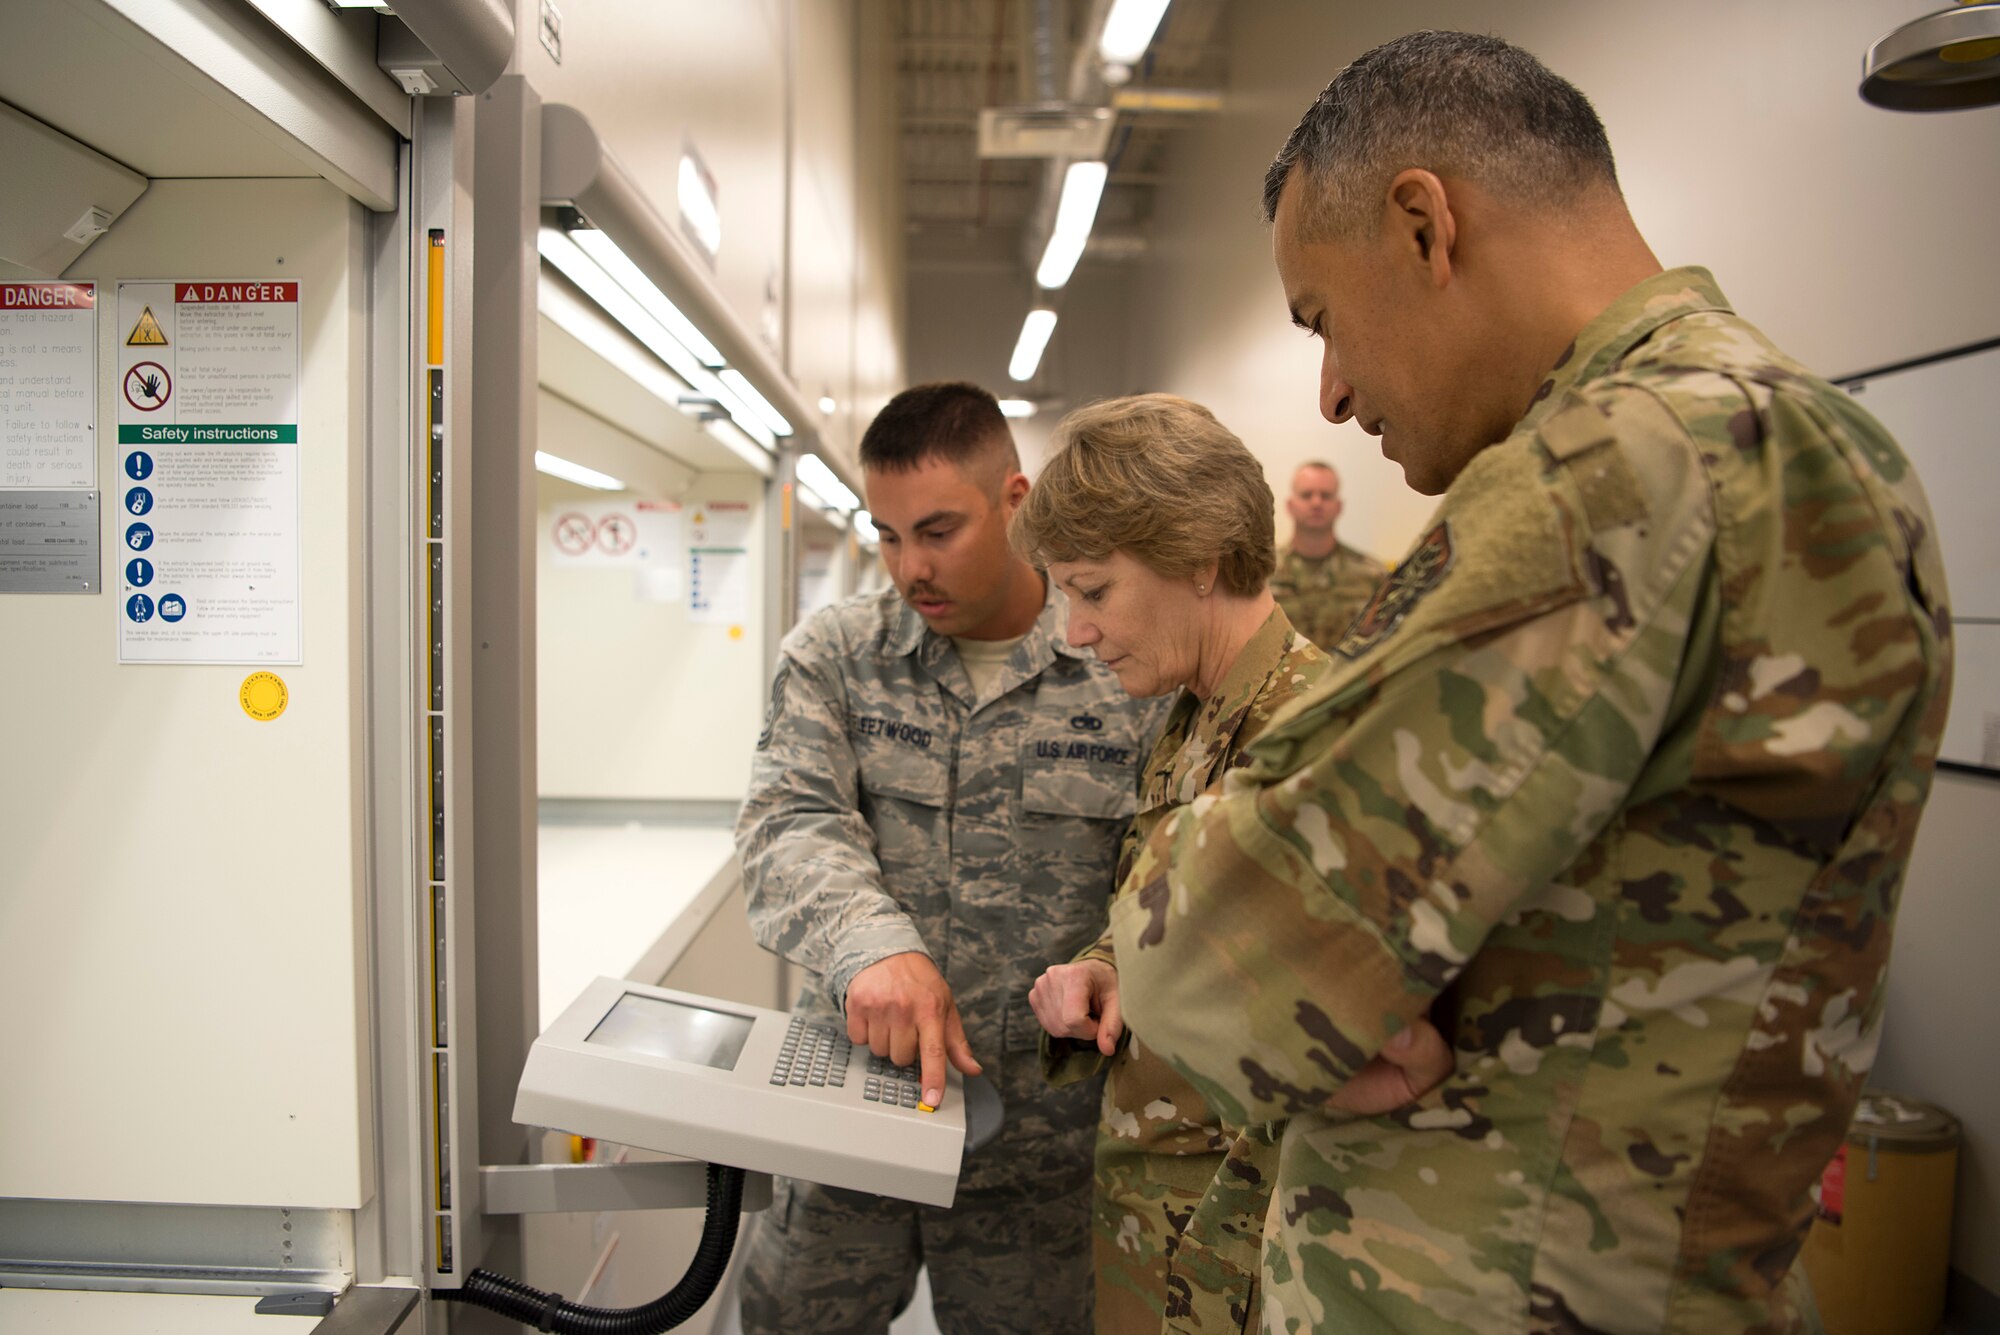 U.S. Air Force Gen. Maryanne Miller, Air Mobility Command commander, and Chief Master Sgt. Terrence Greene, AMC command chief, are shown the new vertical lift storage system at MacDill Air Force Base, Fla., Feb. 13, 2020. This streamline tool kit system was recently implemented as part of the wing’s “Fuel Tank” program, which gives Airmen the opportunity to present innovative ideas to leadership.